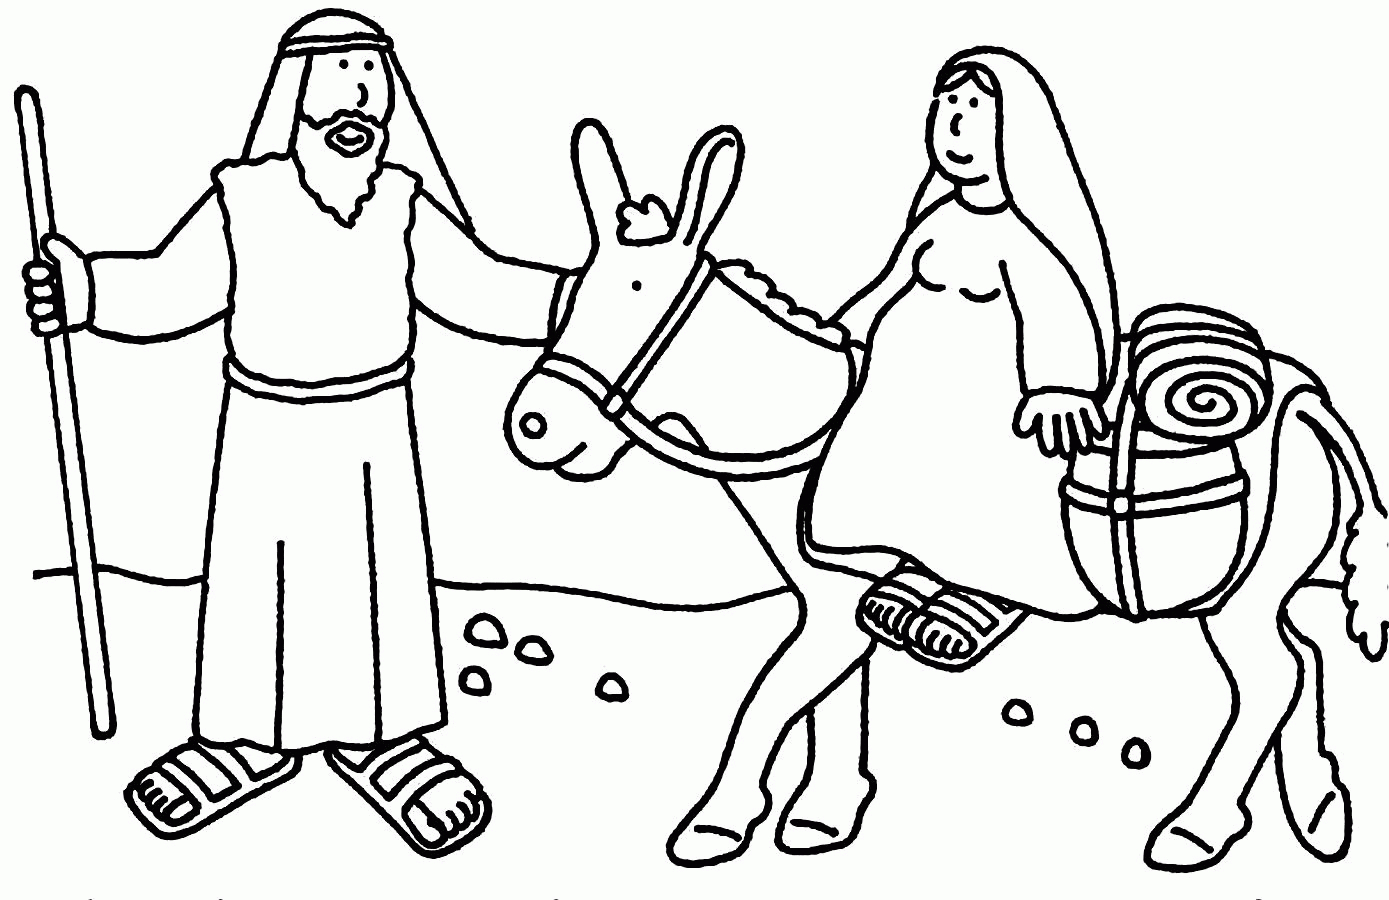 Coloring Ideas : Bible School Coloring Pages Ideas Sunday Christmas - Free Printable Bible Christmas Coloring Pages